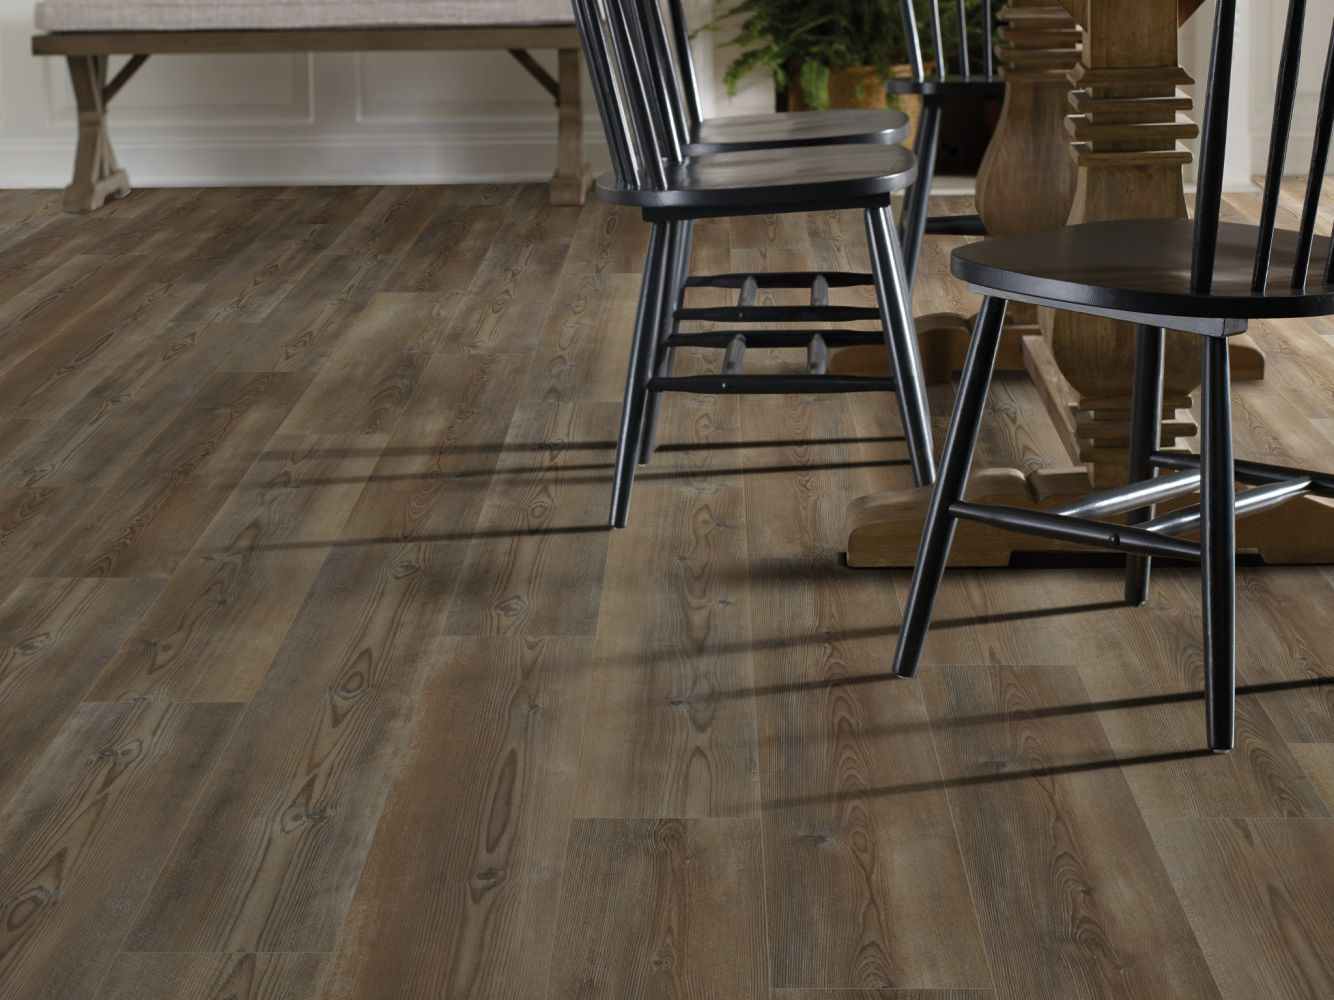 Shaw Floors Resilient Residential Paragon 7″ Plus Ripped Pine 07047_1020V